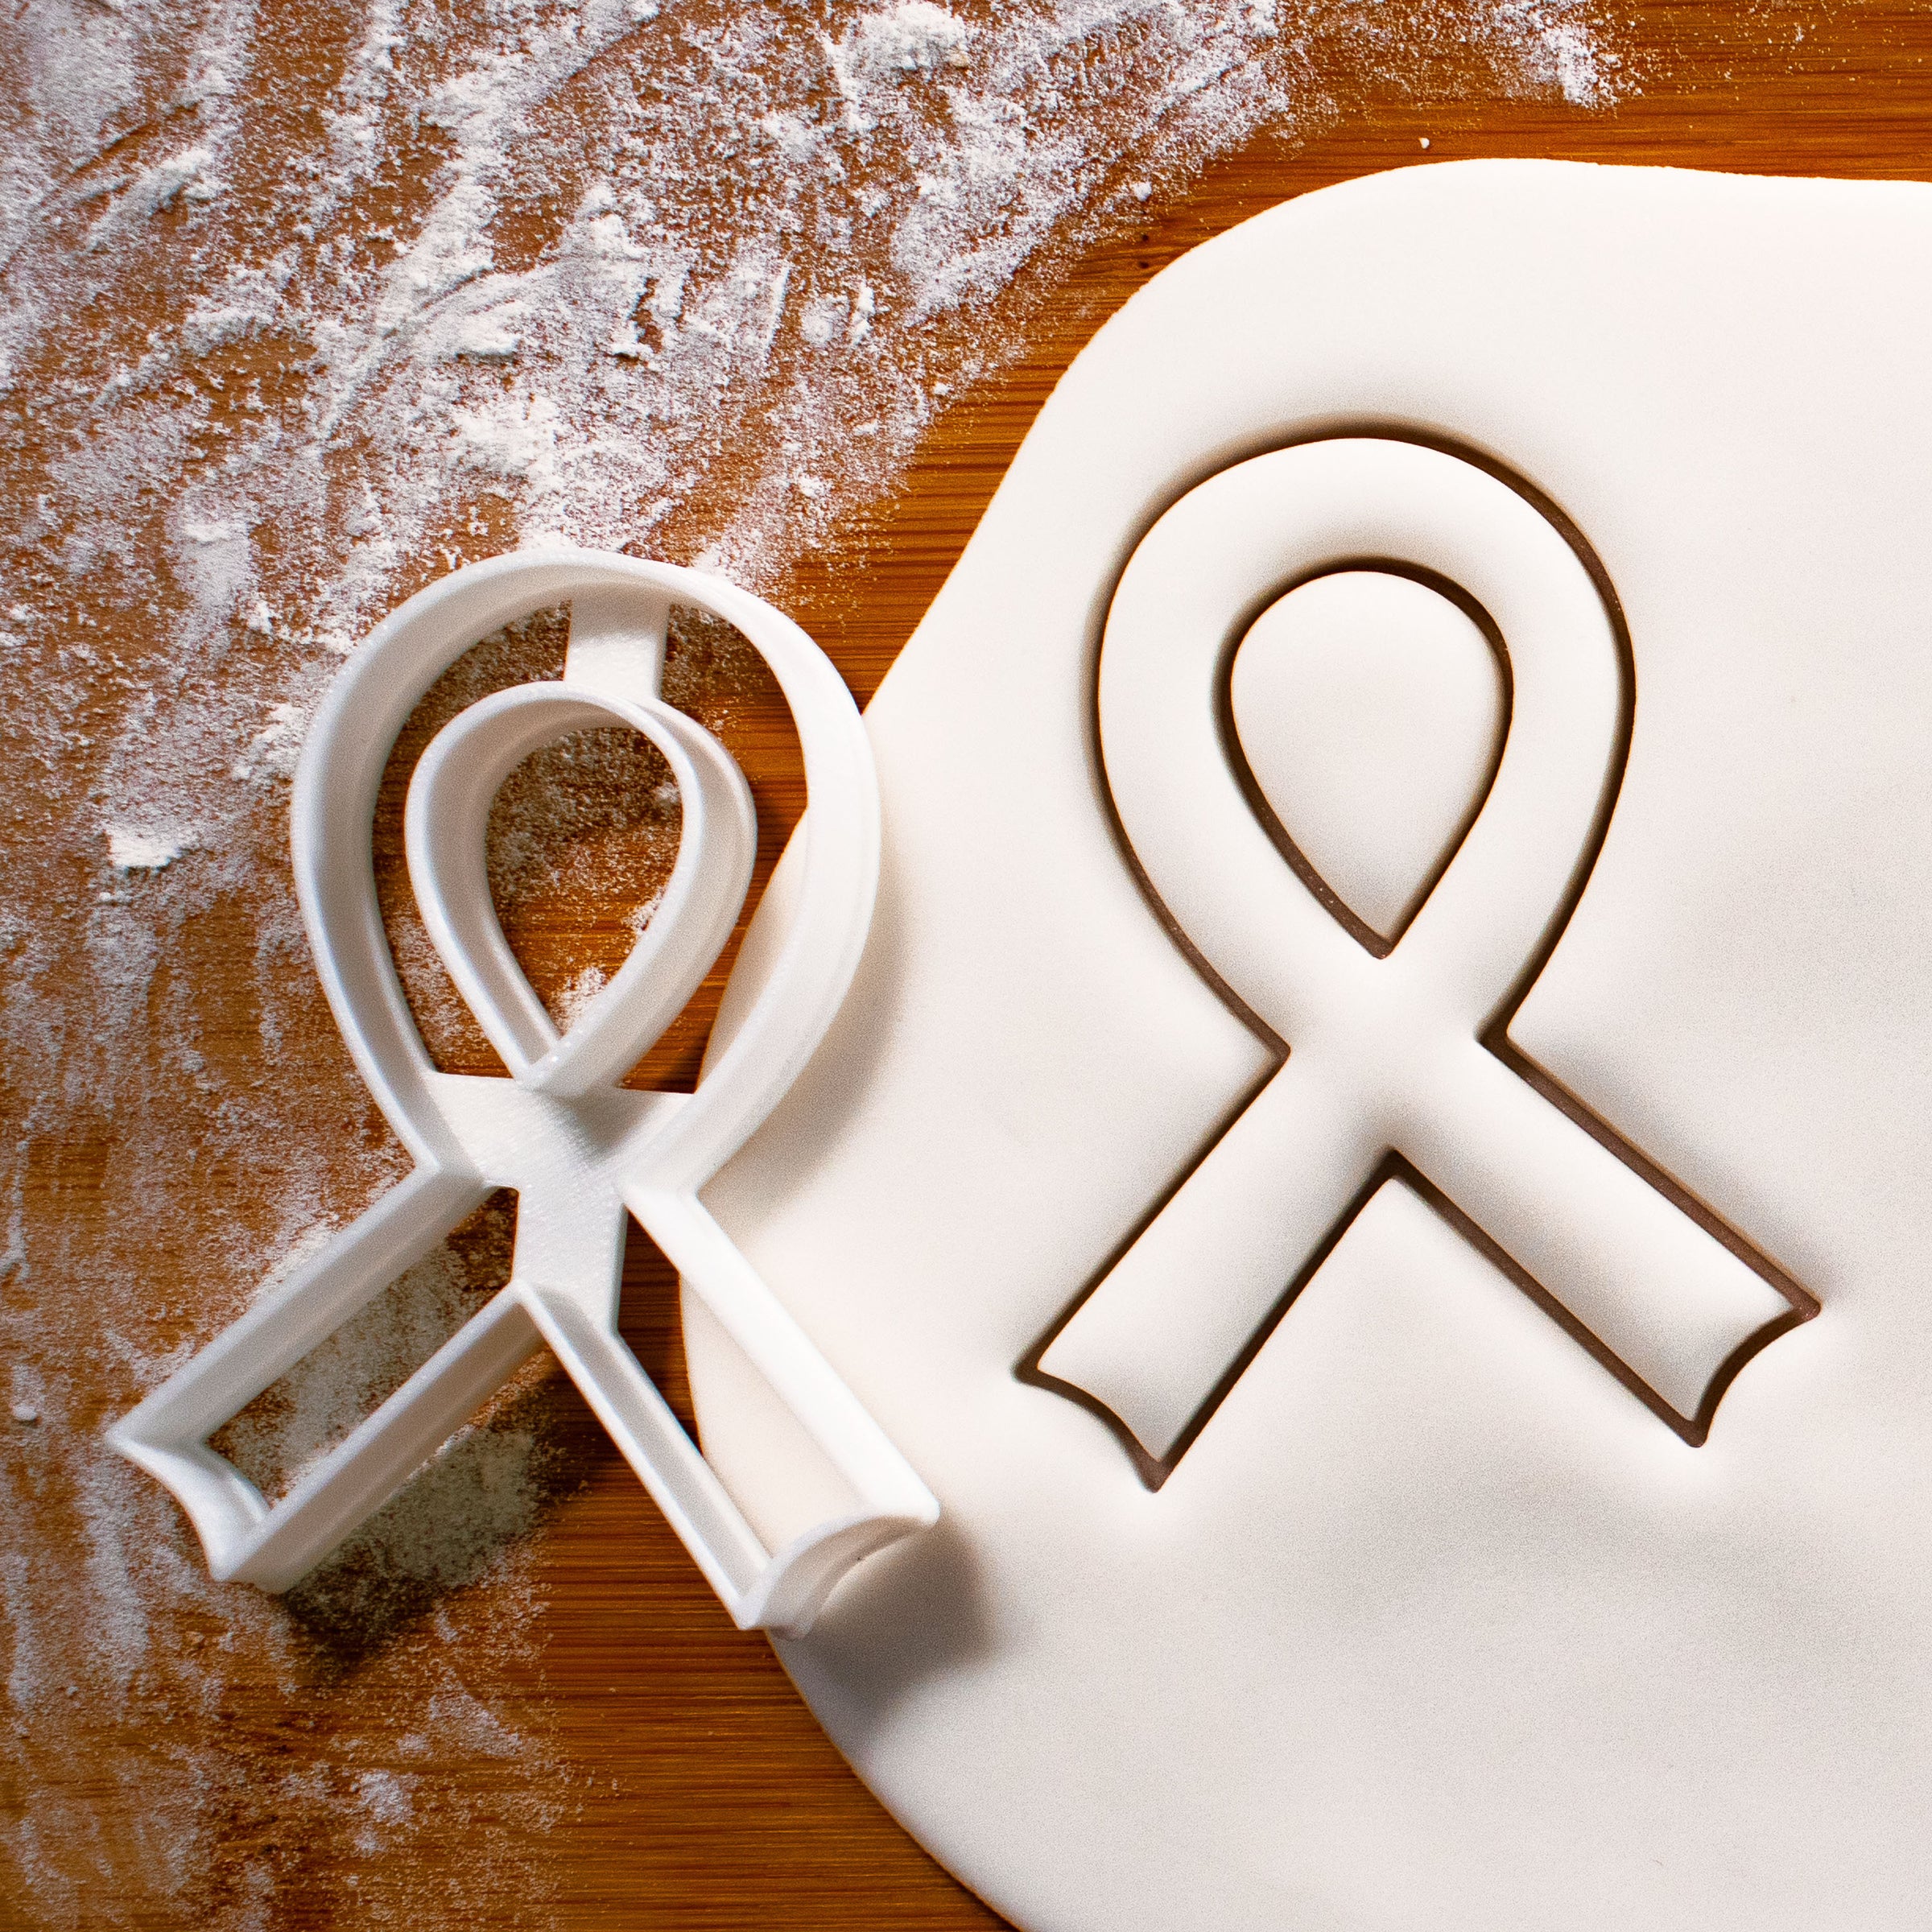 awareness ribbon cookie cutter pressed on fondant